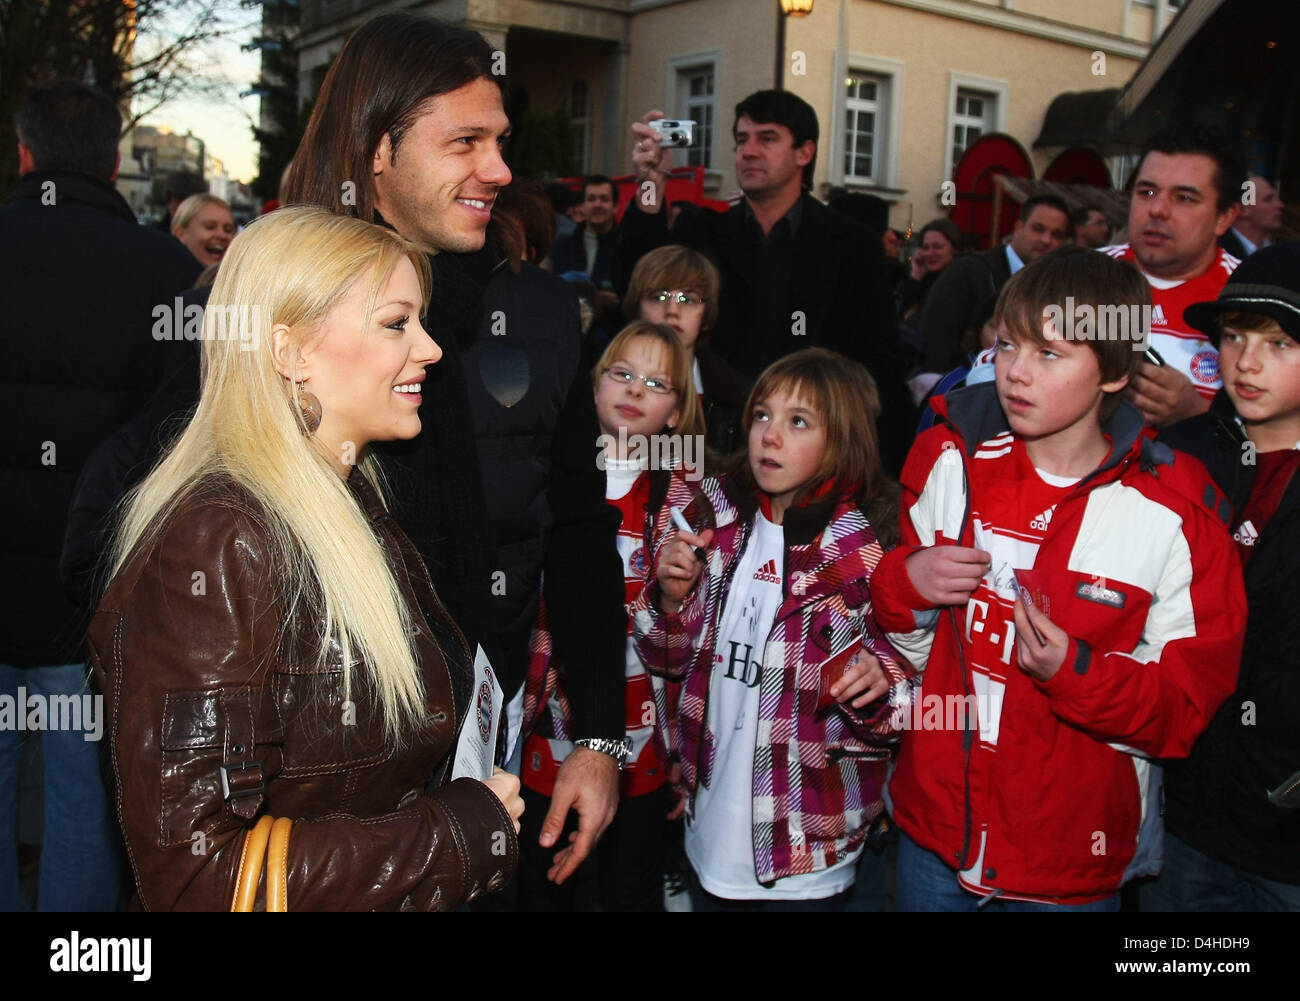 Soccer player of German Bundesliga soccer club Bayern Munich, Martin Demichelis (2-L), and his girlfriend, Evangelina Anderson (L), arrive for the Bayern Munich Circus Gala 2008 at Circus Krone in Munich, Germany, 08 December 2008. Photo: Alexander Hassenstein Stock Photo